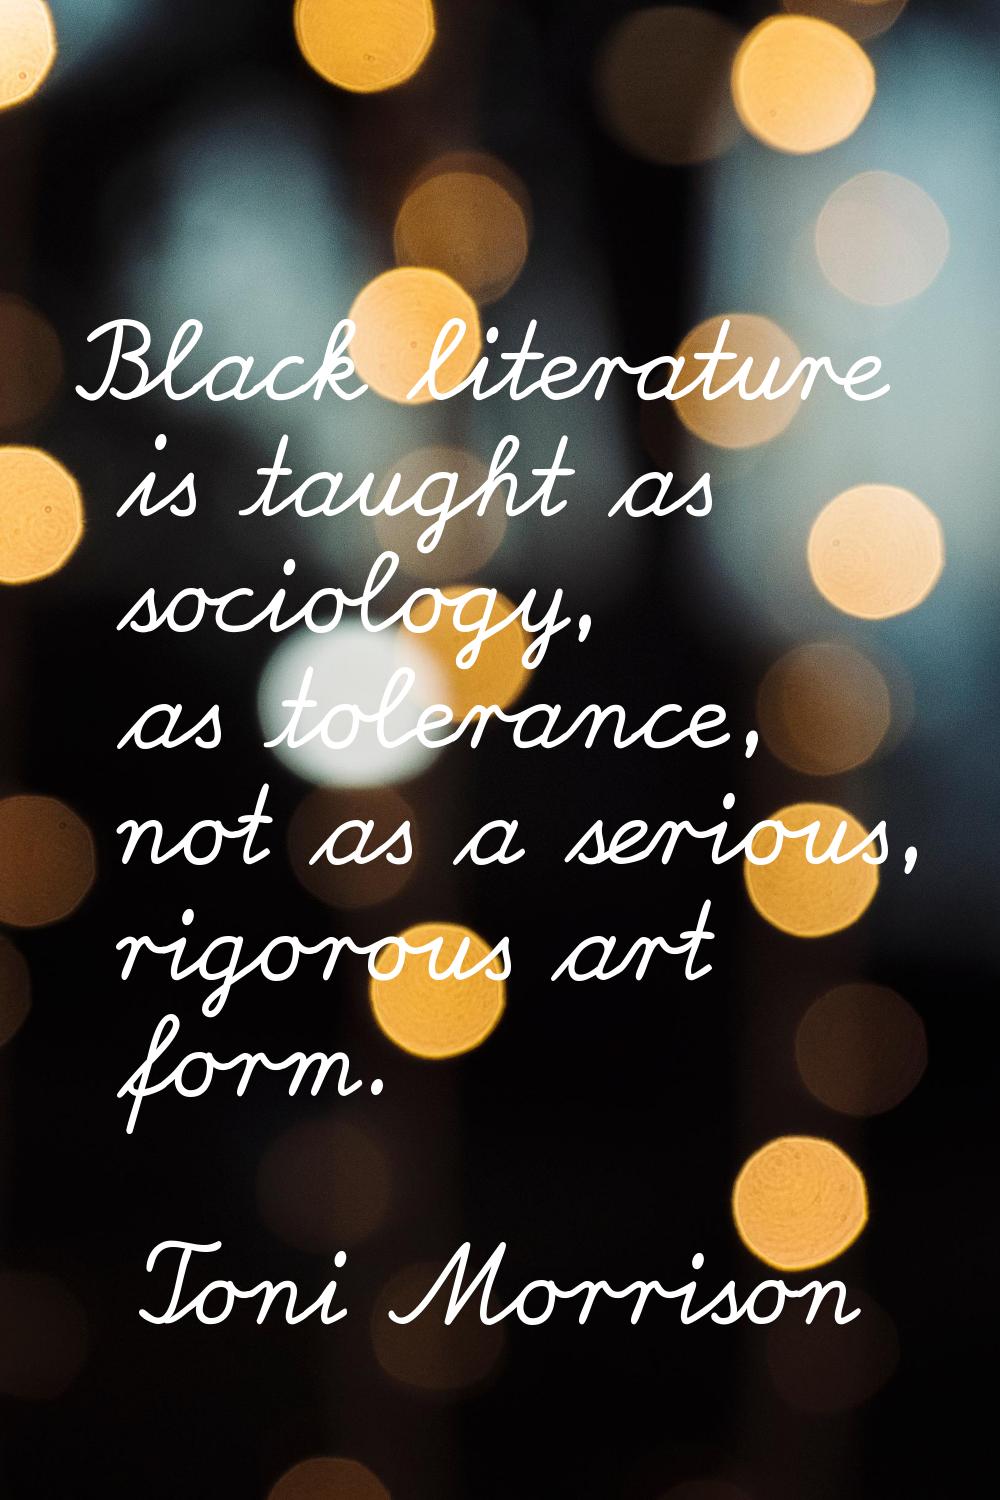 Black literature is taught as sociology, as tolerance, not as a serious, rigorous art form.